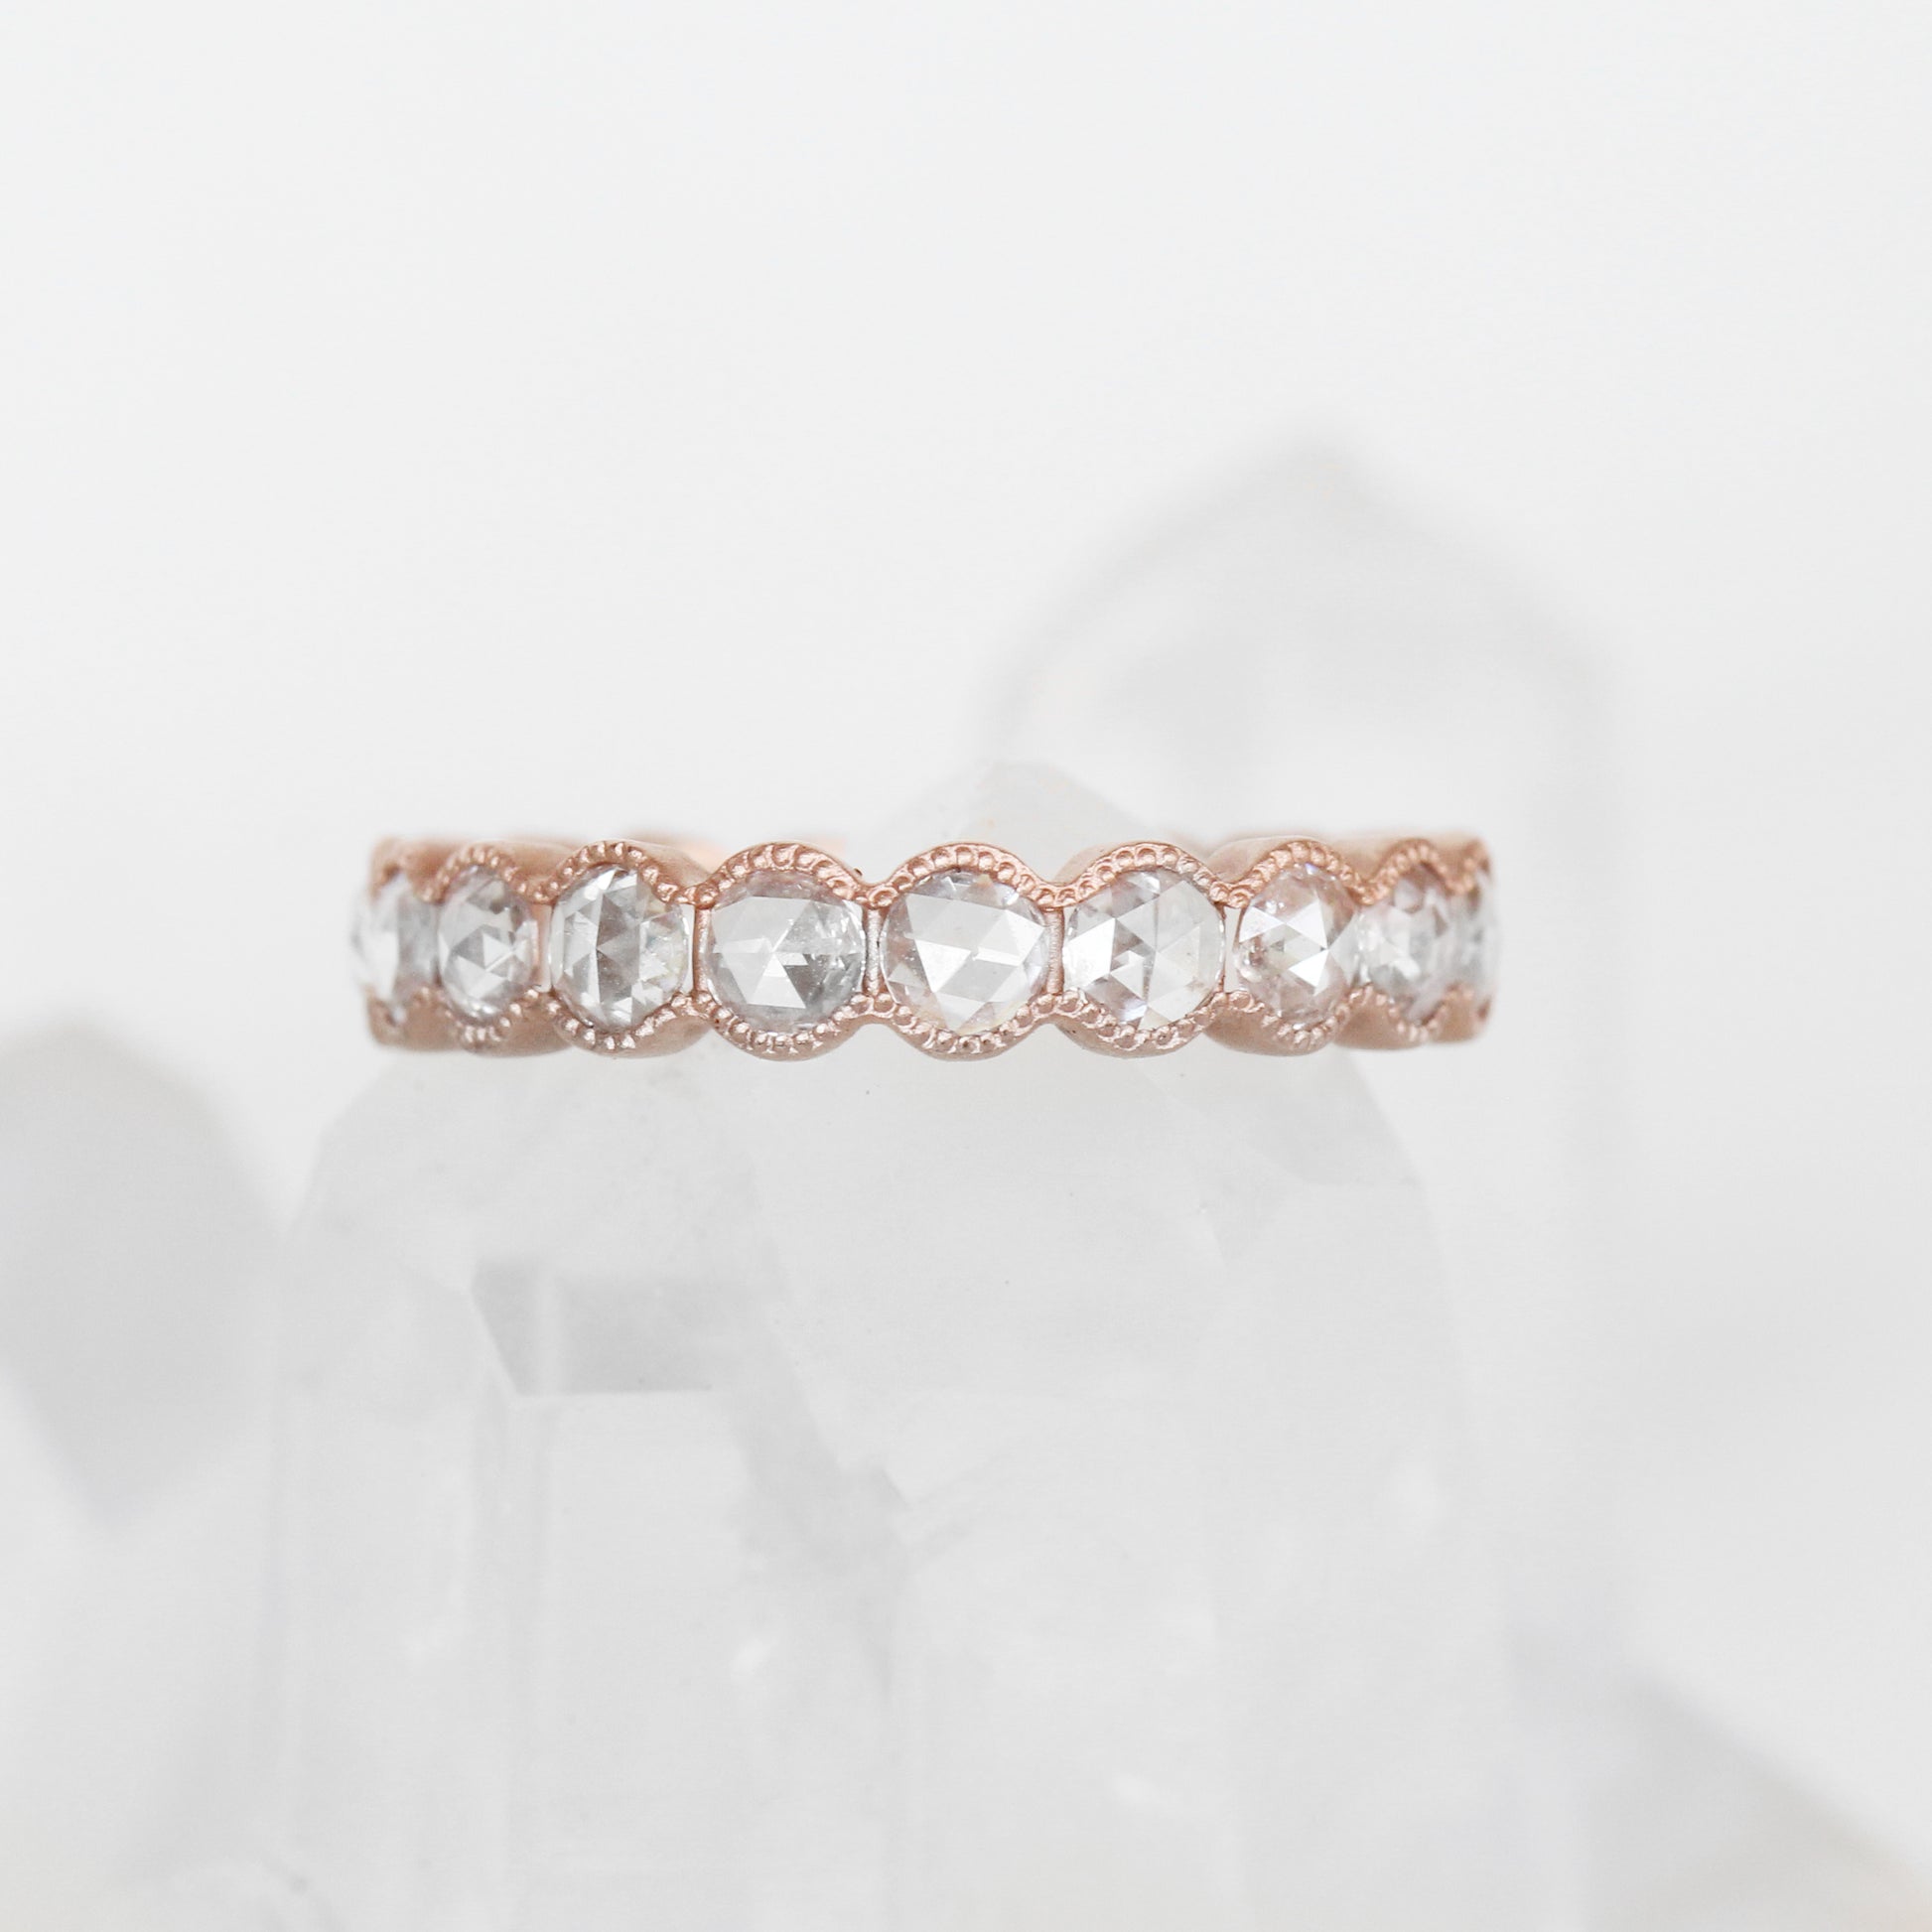 Penelope Rose Cut Milgrain Antique Style Bezel Diamond Engagement Ring Band - Midwinter Co. Alternative Bridal Rings and Modern Fine Jewelry